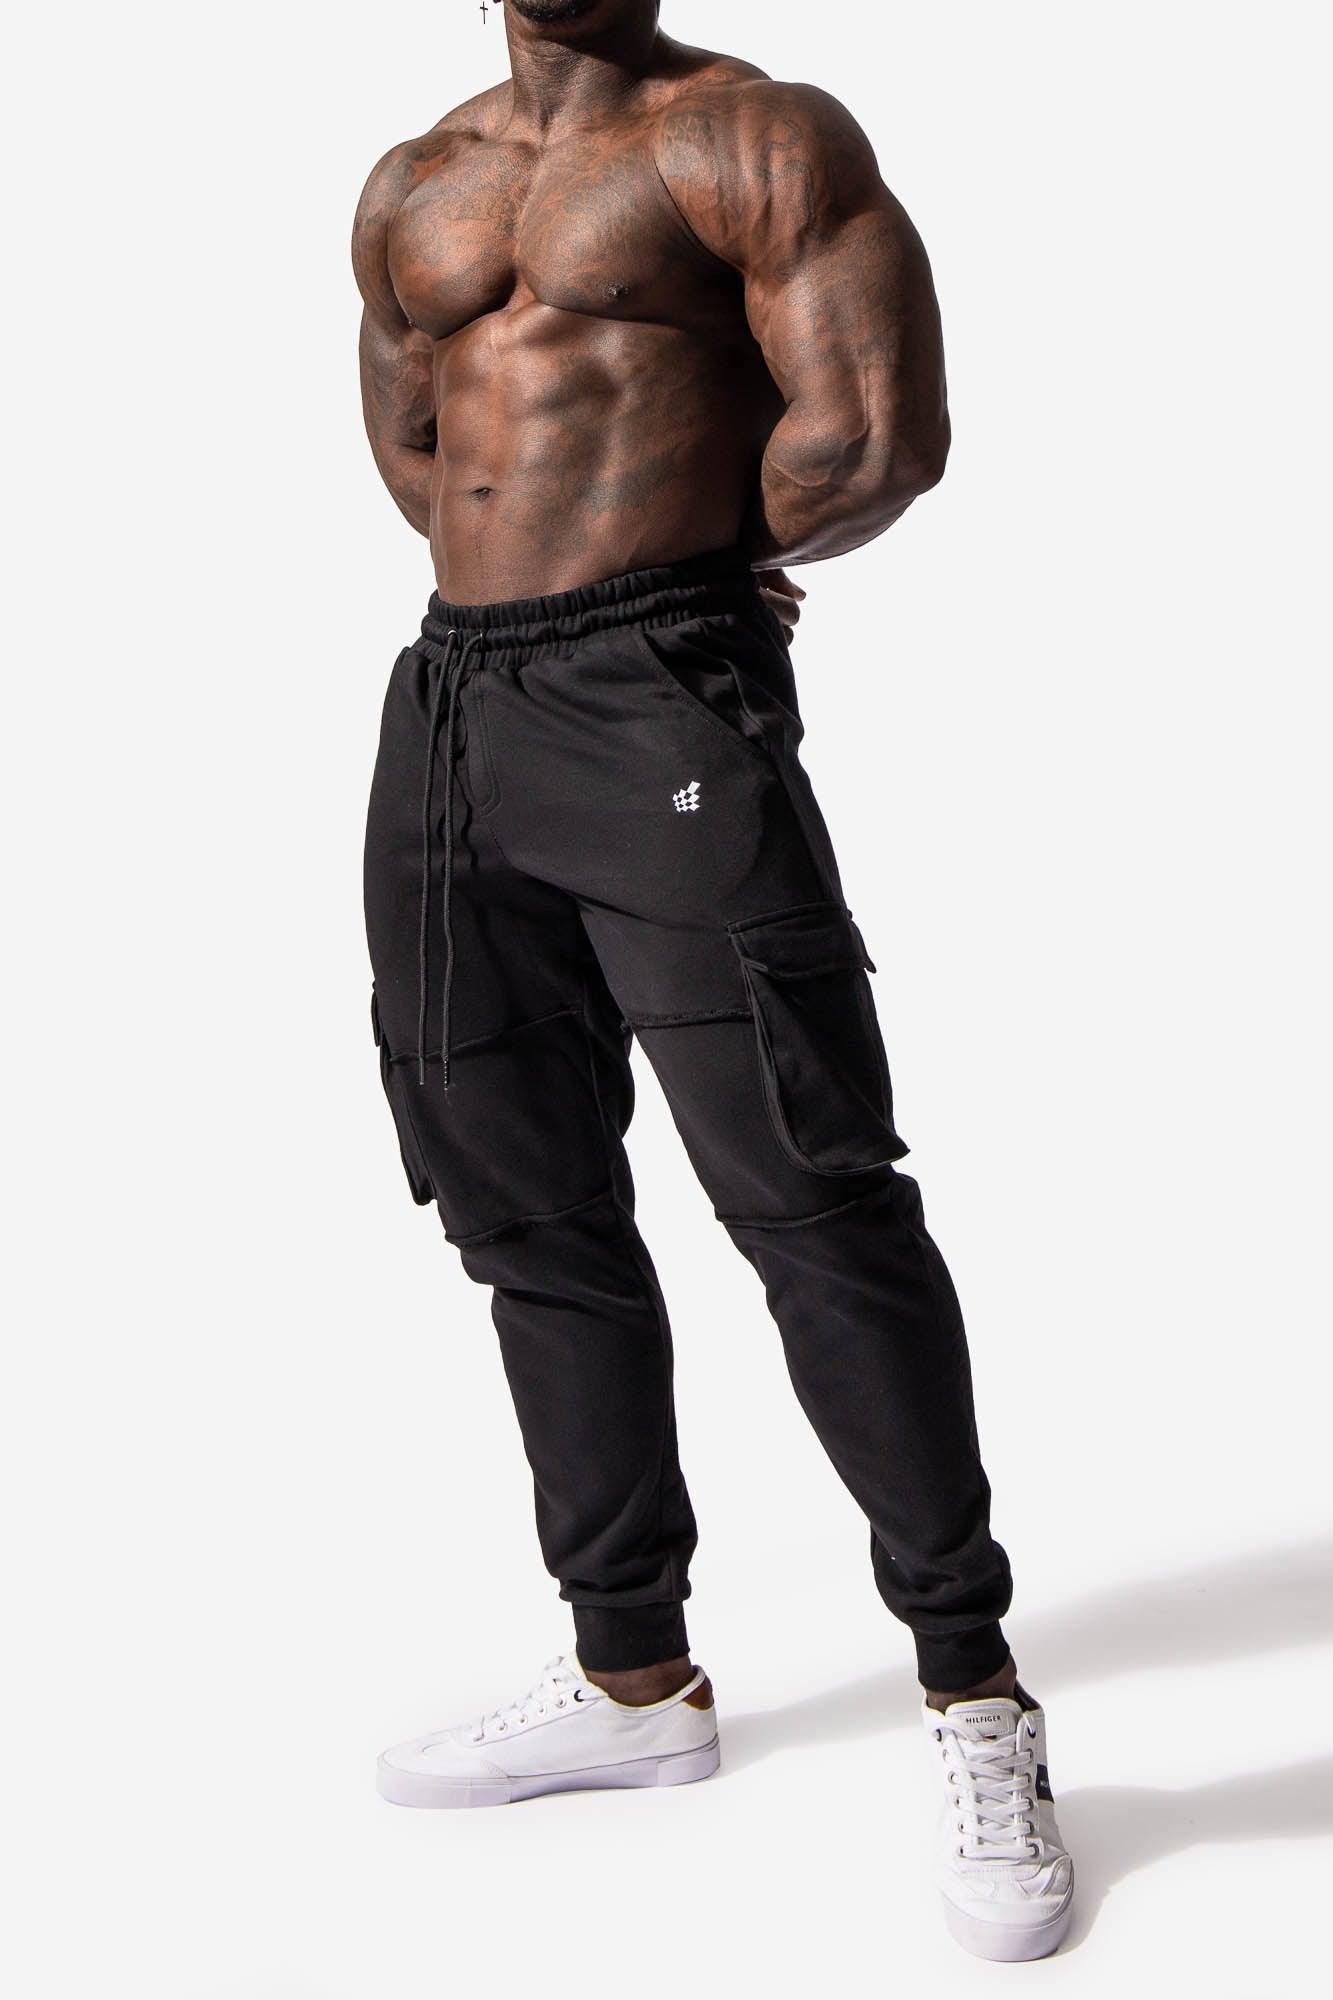 Fashion Men's Sexy Tight Pants Casual Sweatpants Low Rise Elastic Skinny  Active Pants Compression Track Bottoms